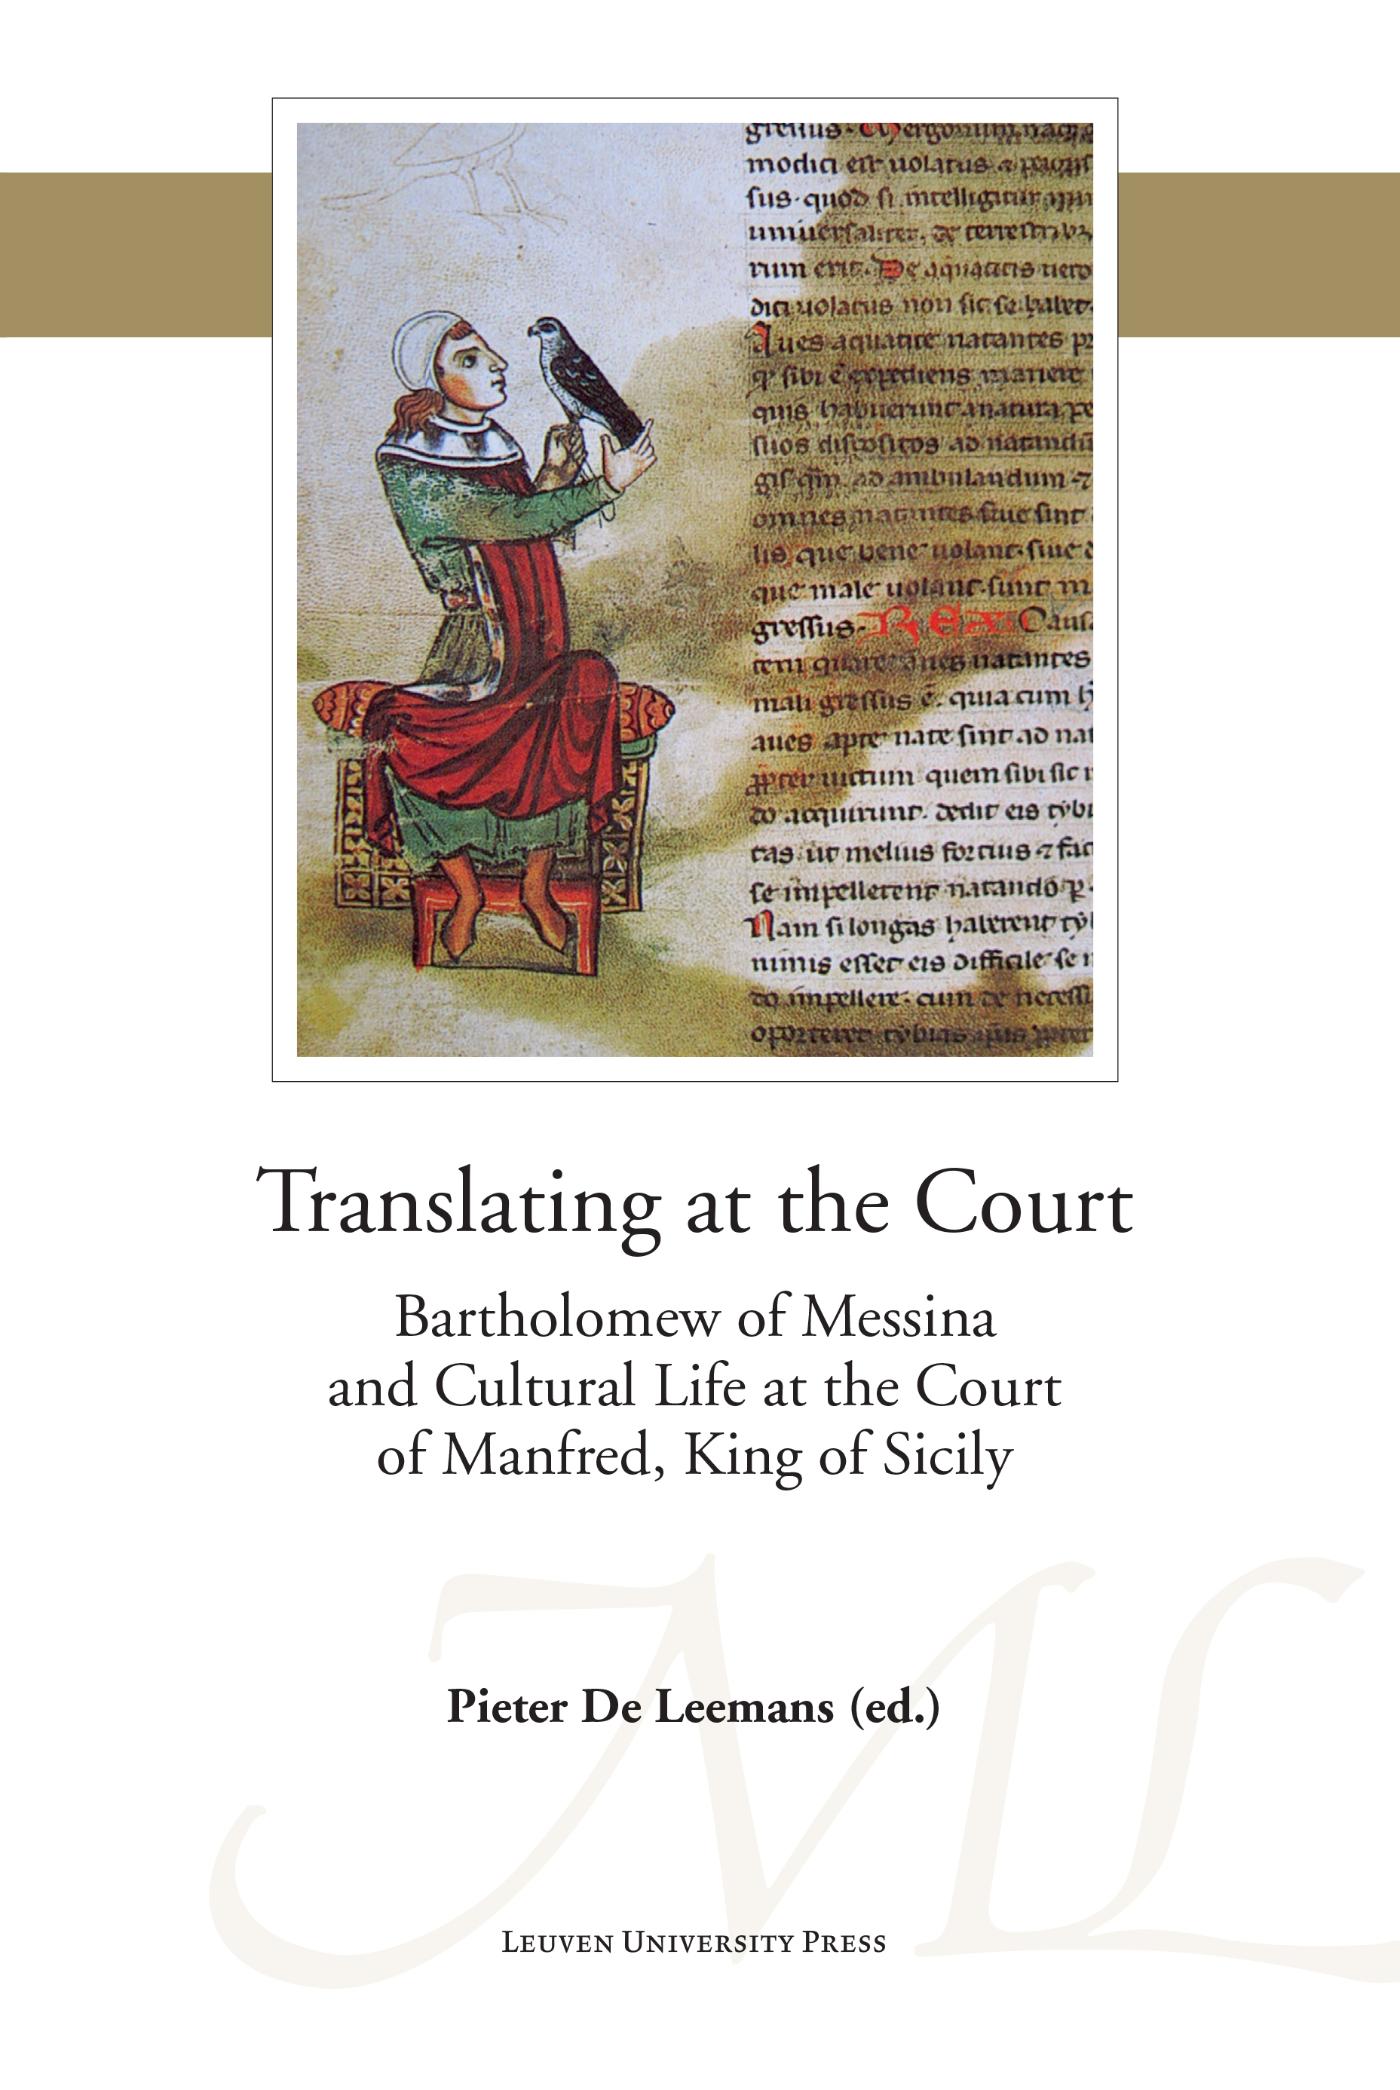 Translating at the court (Ebook)